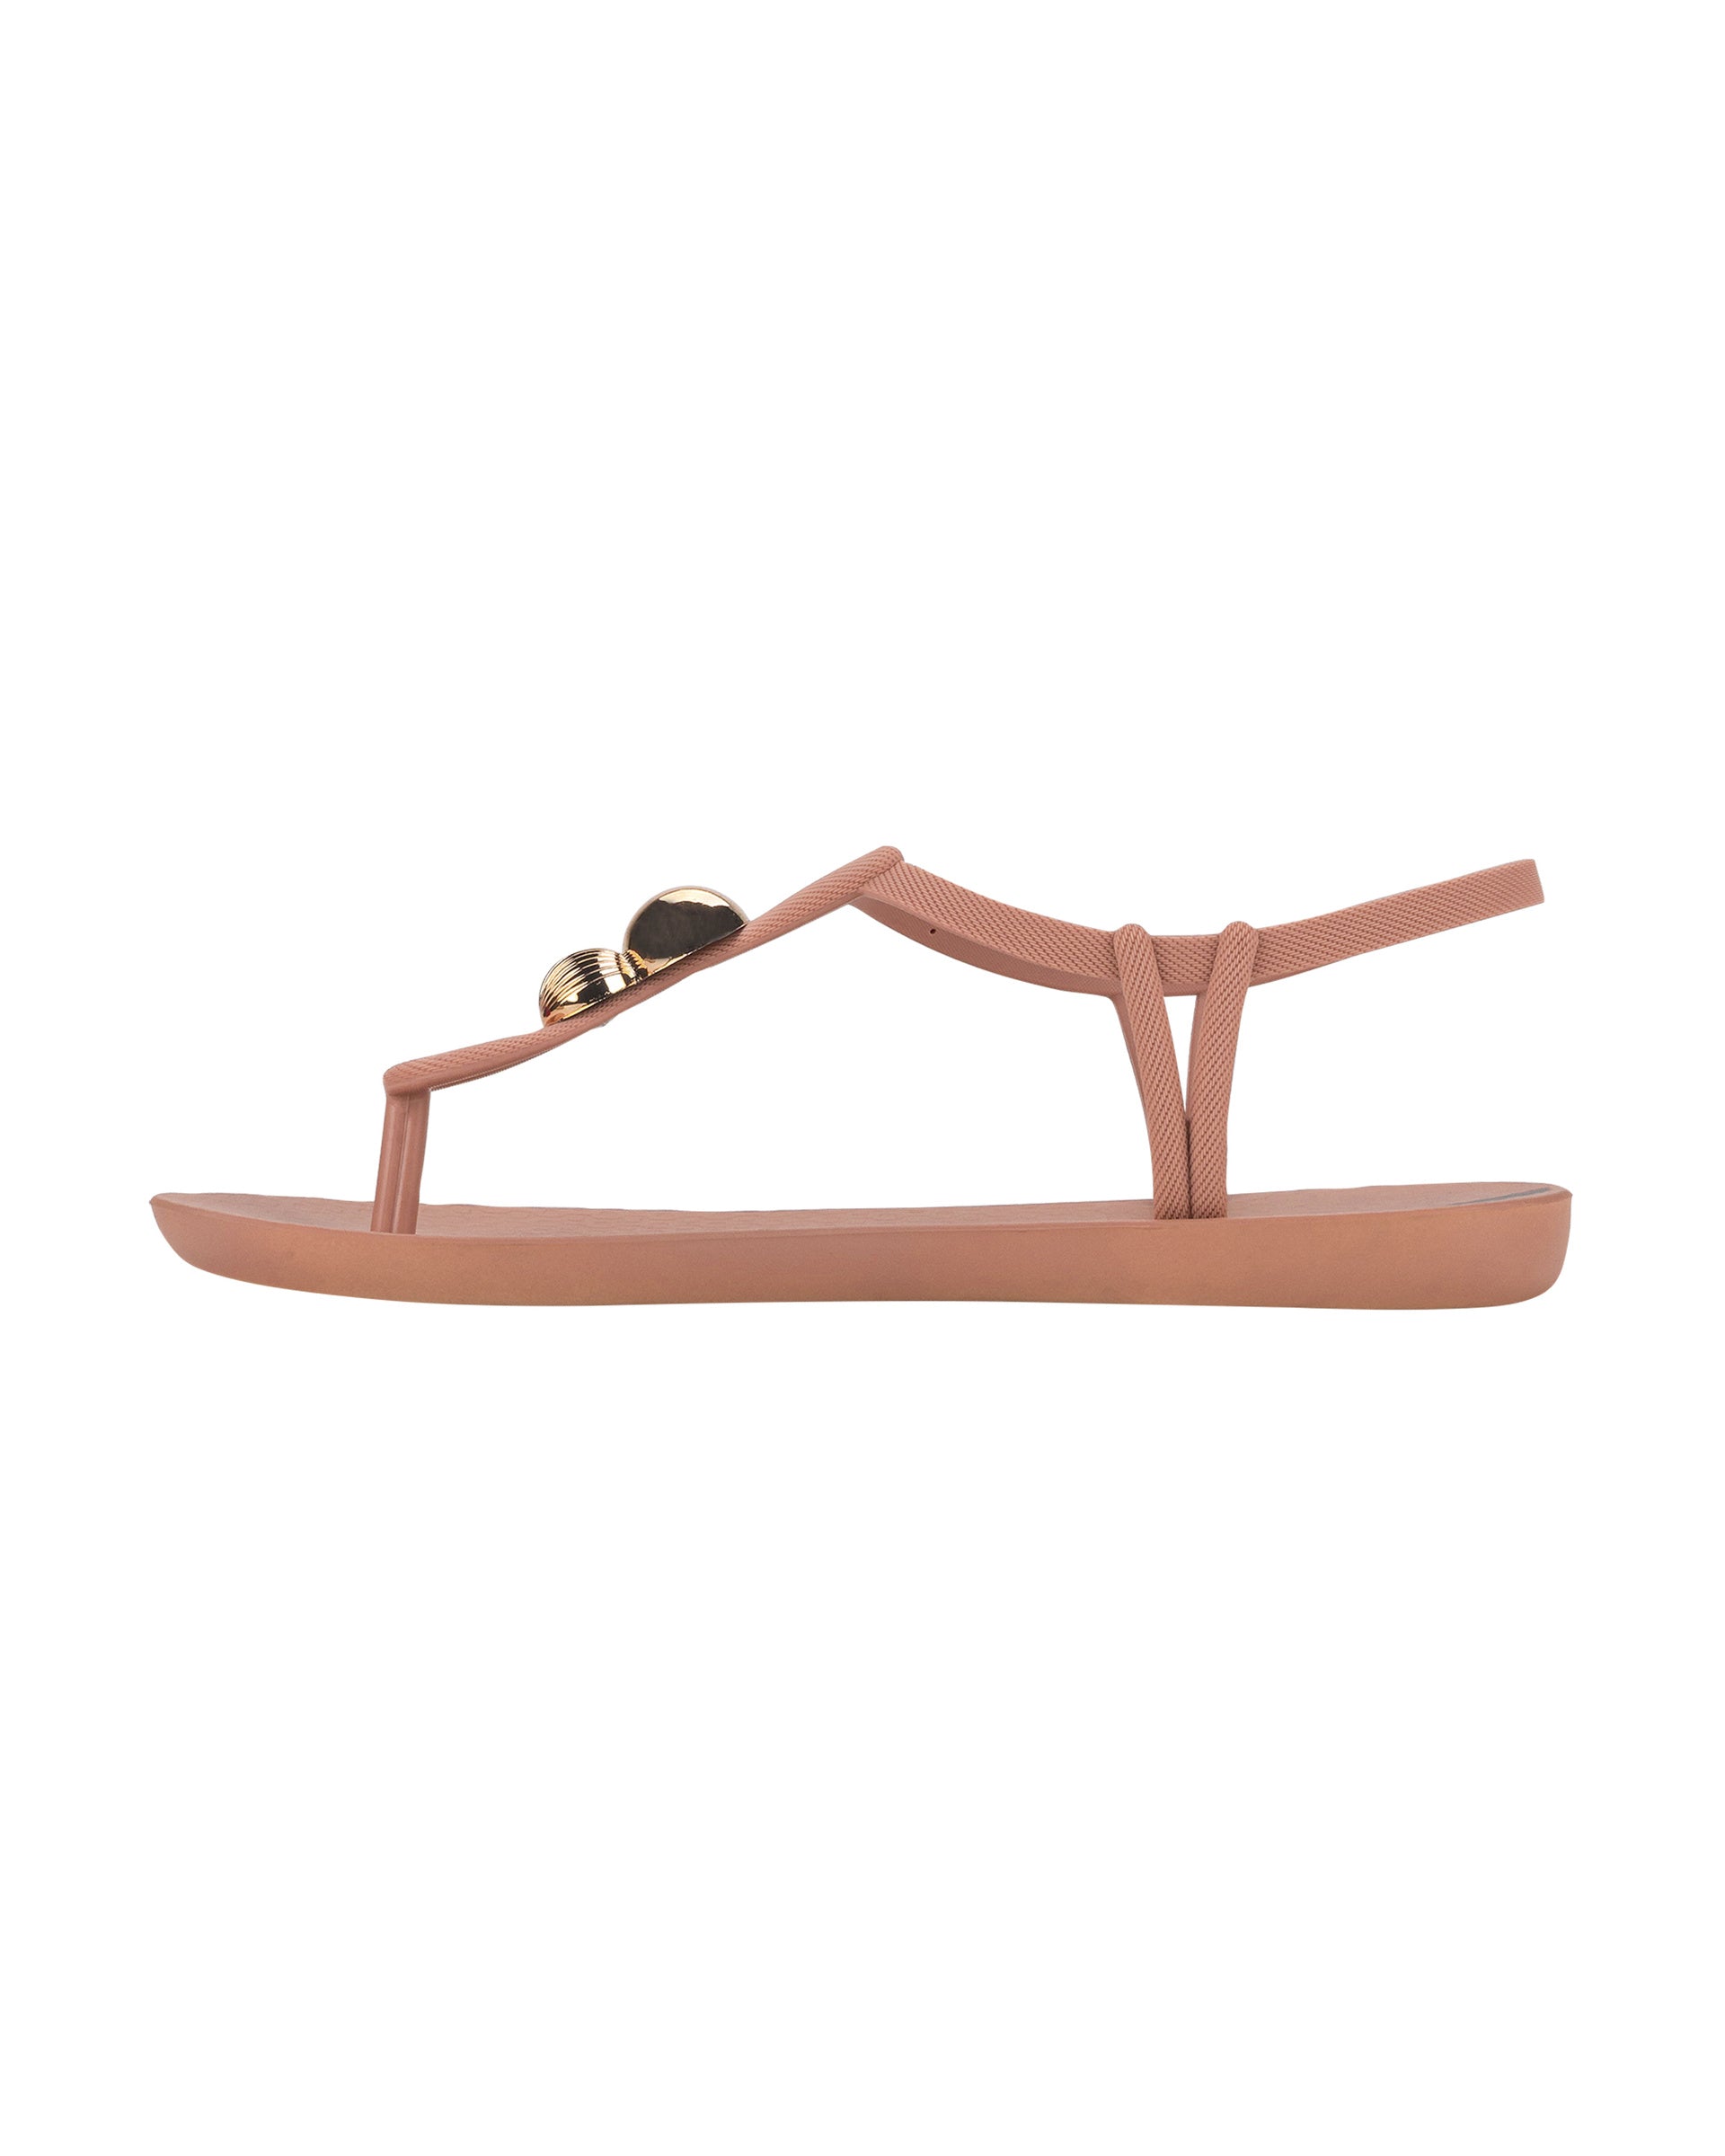 Inner side view of a light pink Ipanema Class Spheres women's t-strap sandal with metallic bauble.